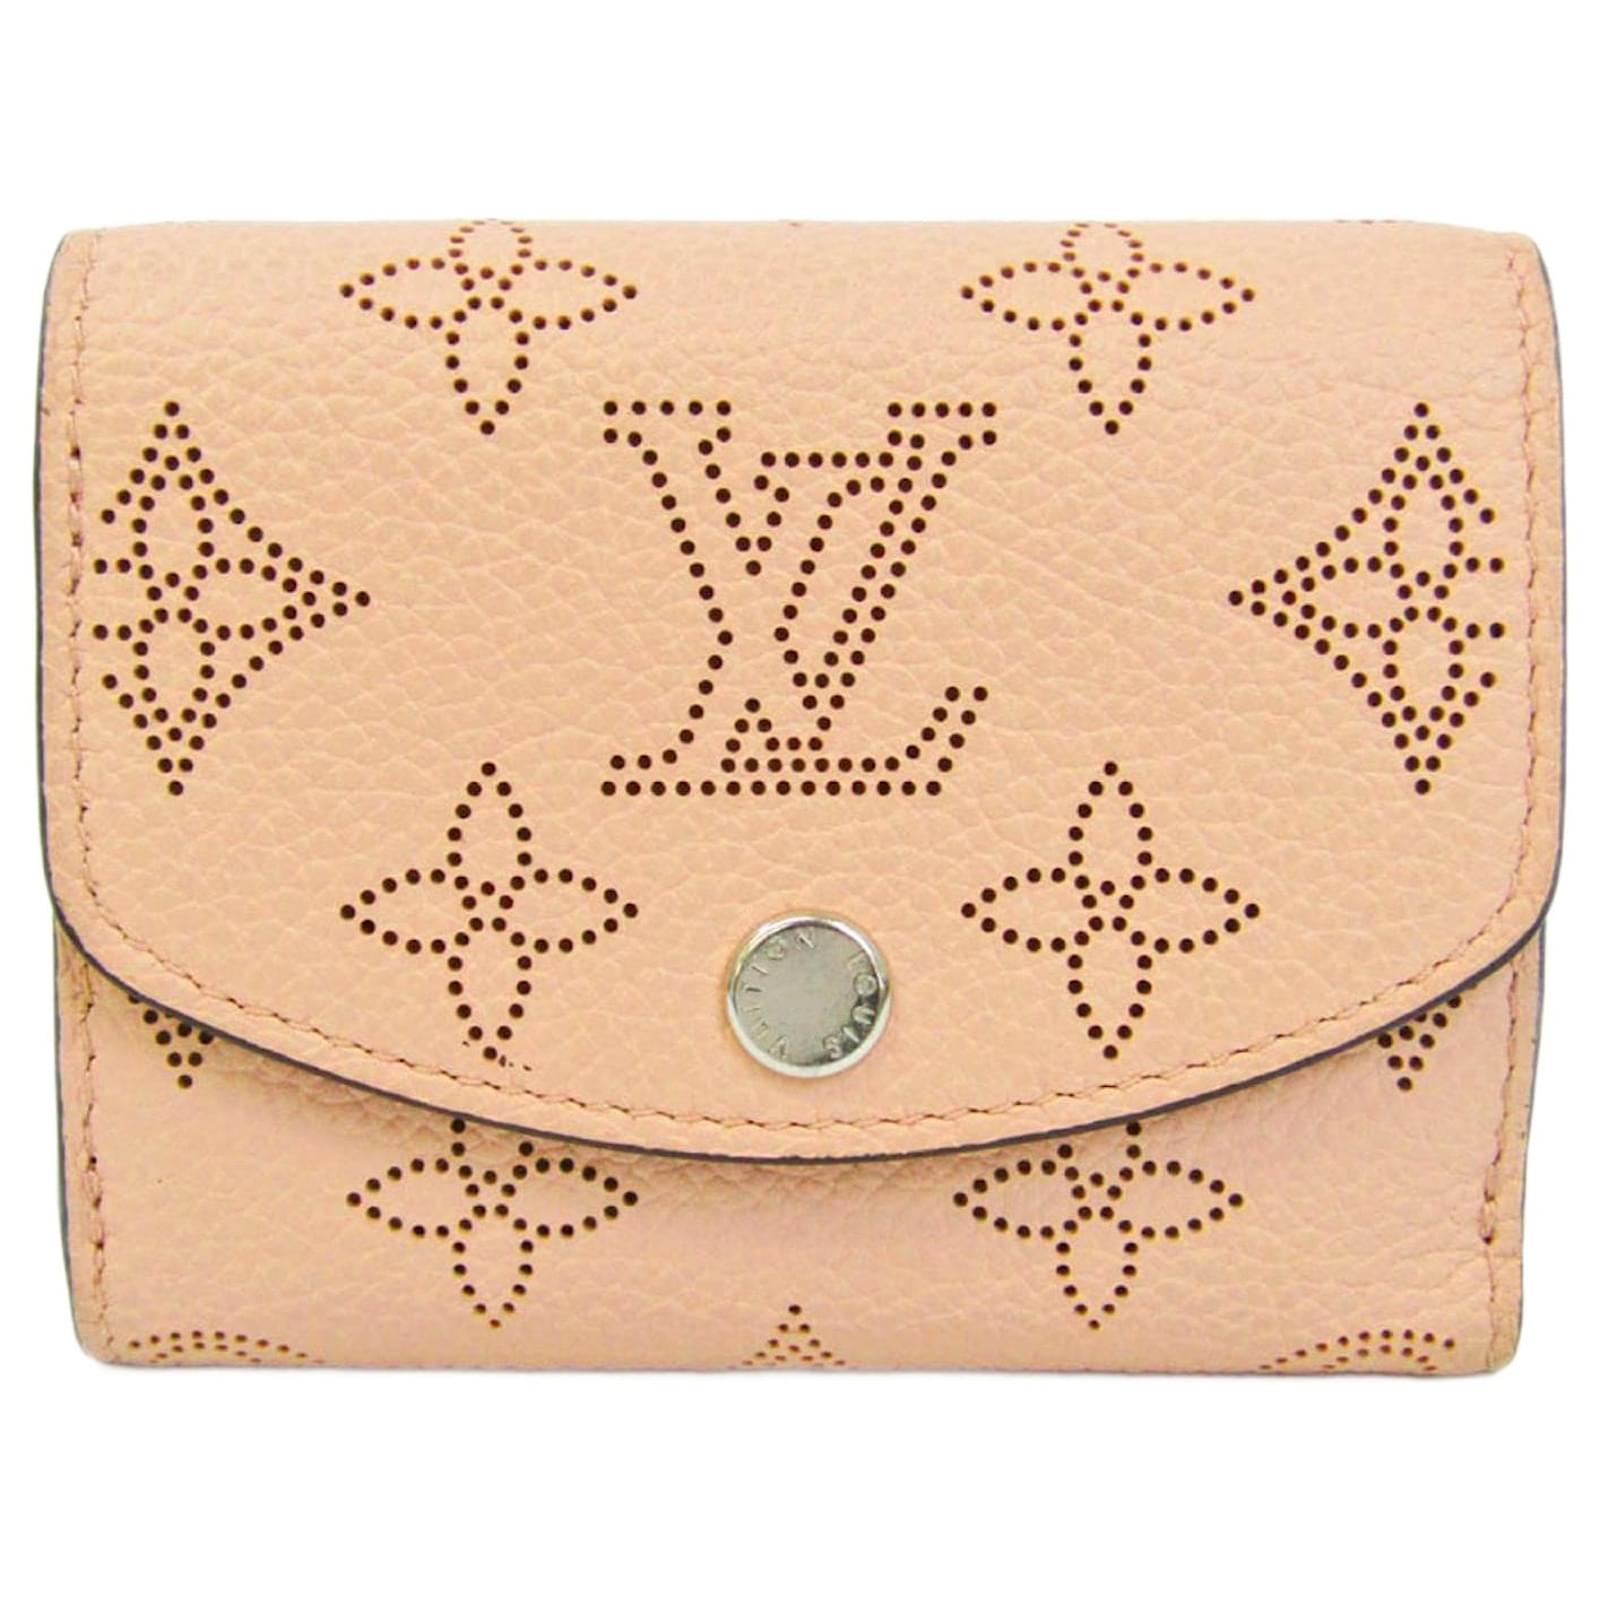 Louis Vuitton Woman's Wallet Vernis French Pomme D'Amour Crossbody Woc Wallet Preowned